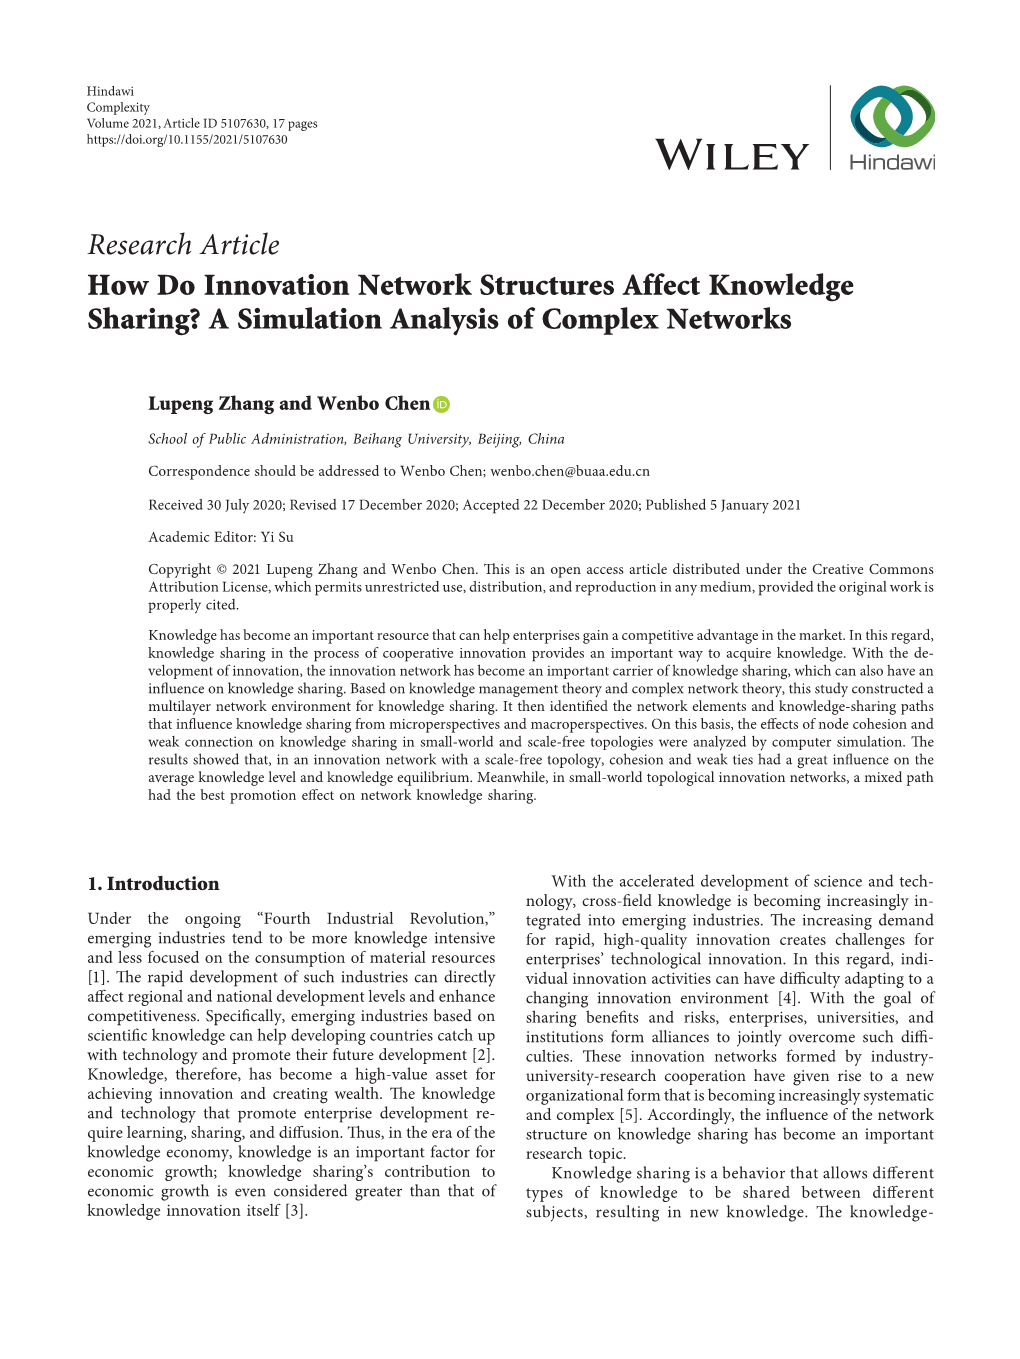 How Do Innovation Network Structures Affect Knowledge Sharing? a Simulation Analysis of Complex Networks